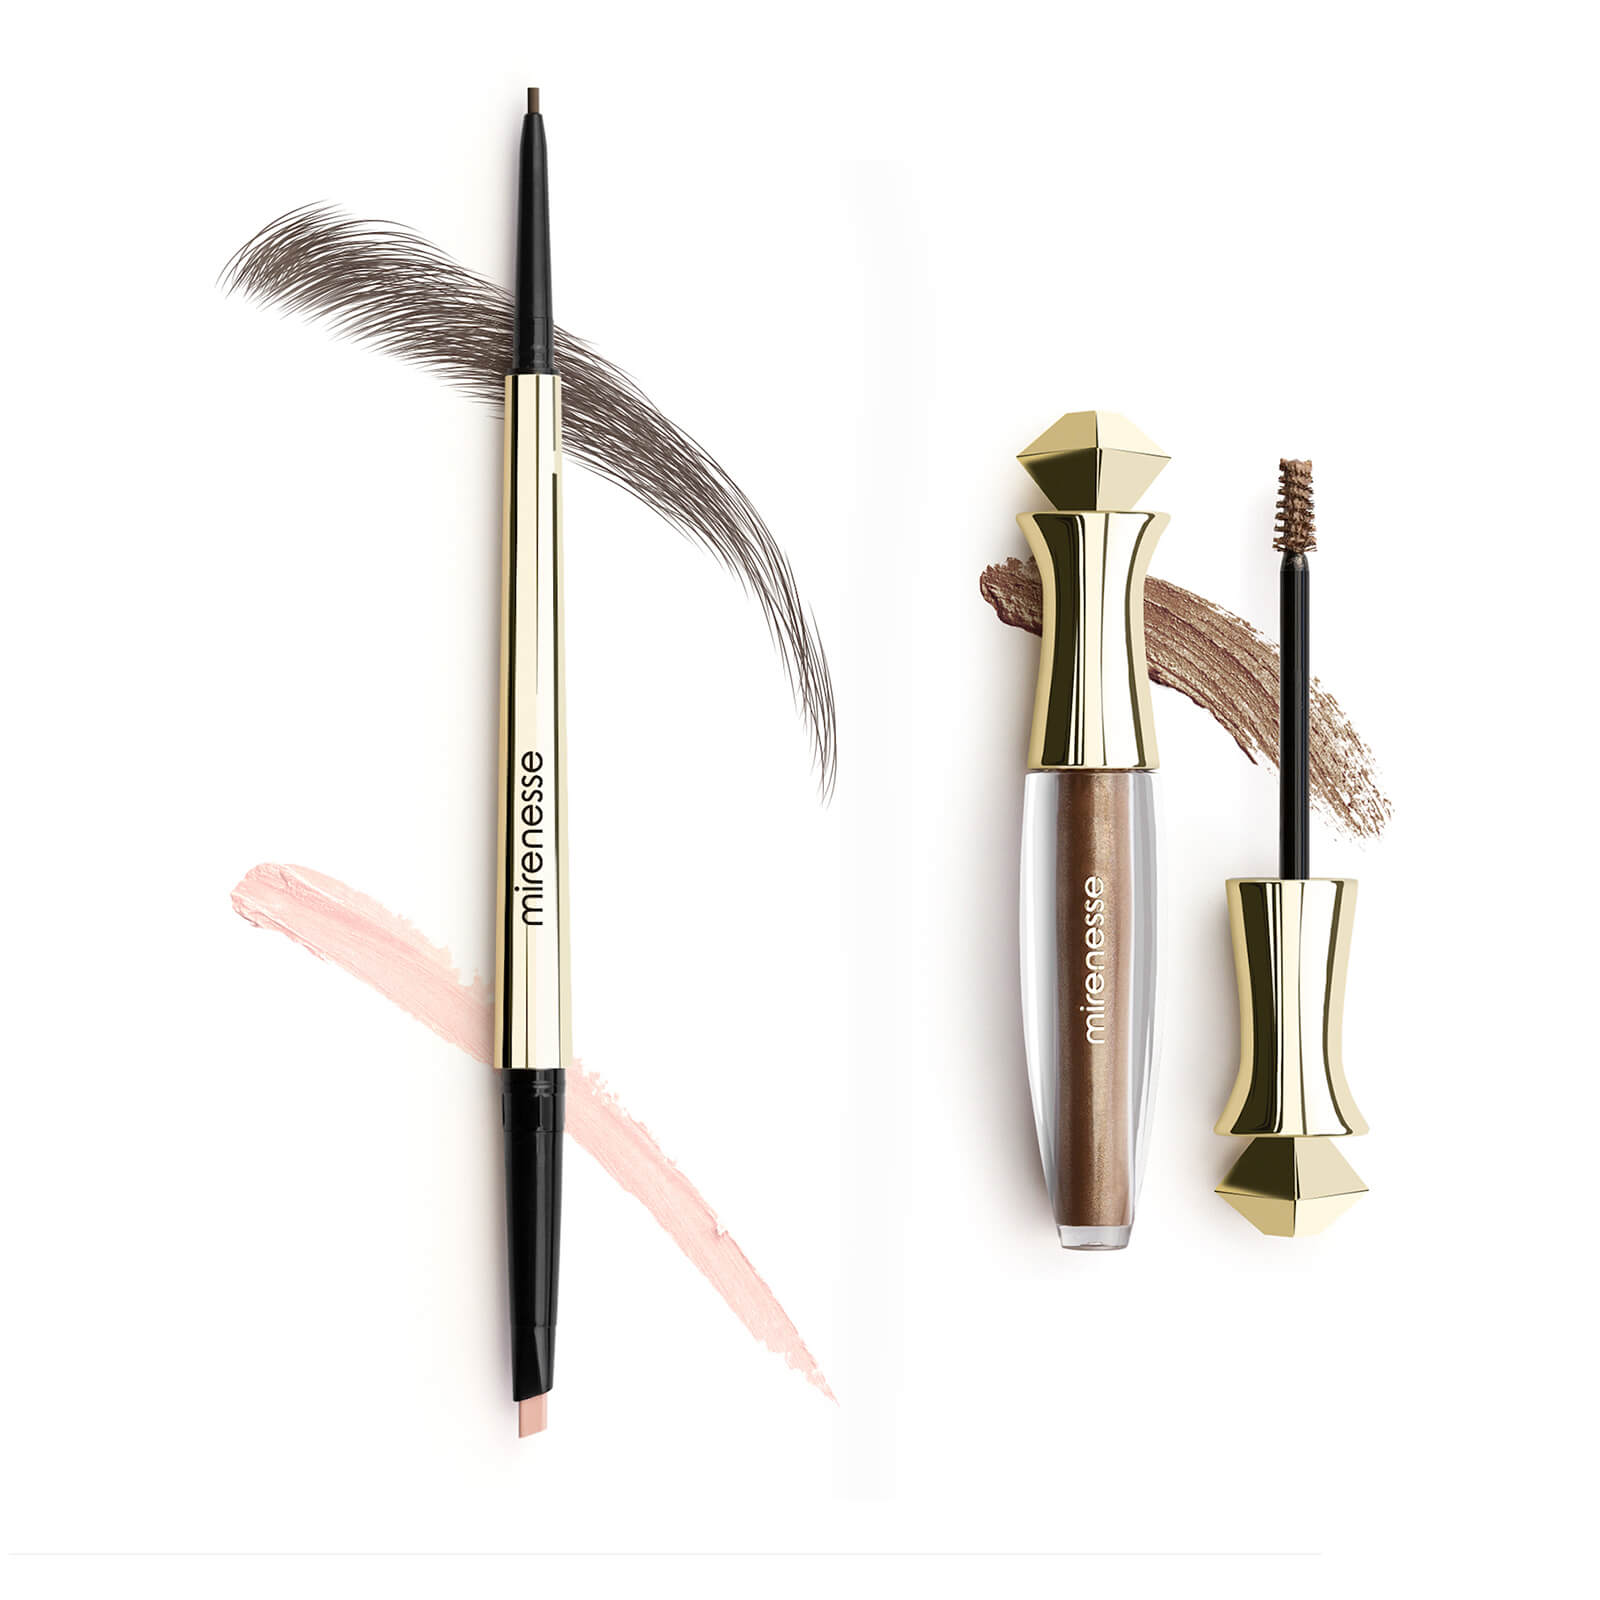 mirenesse All Day Micro Brow Pencil and Shaping Mascara Set - 3 Cappuccino